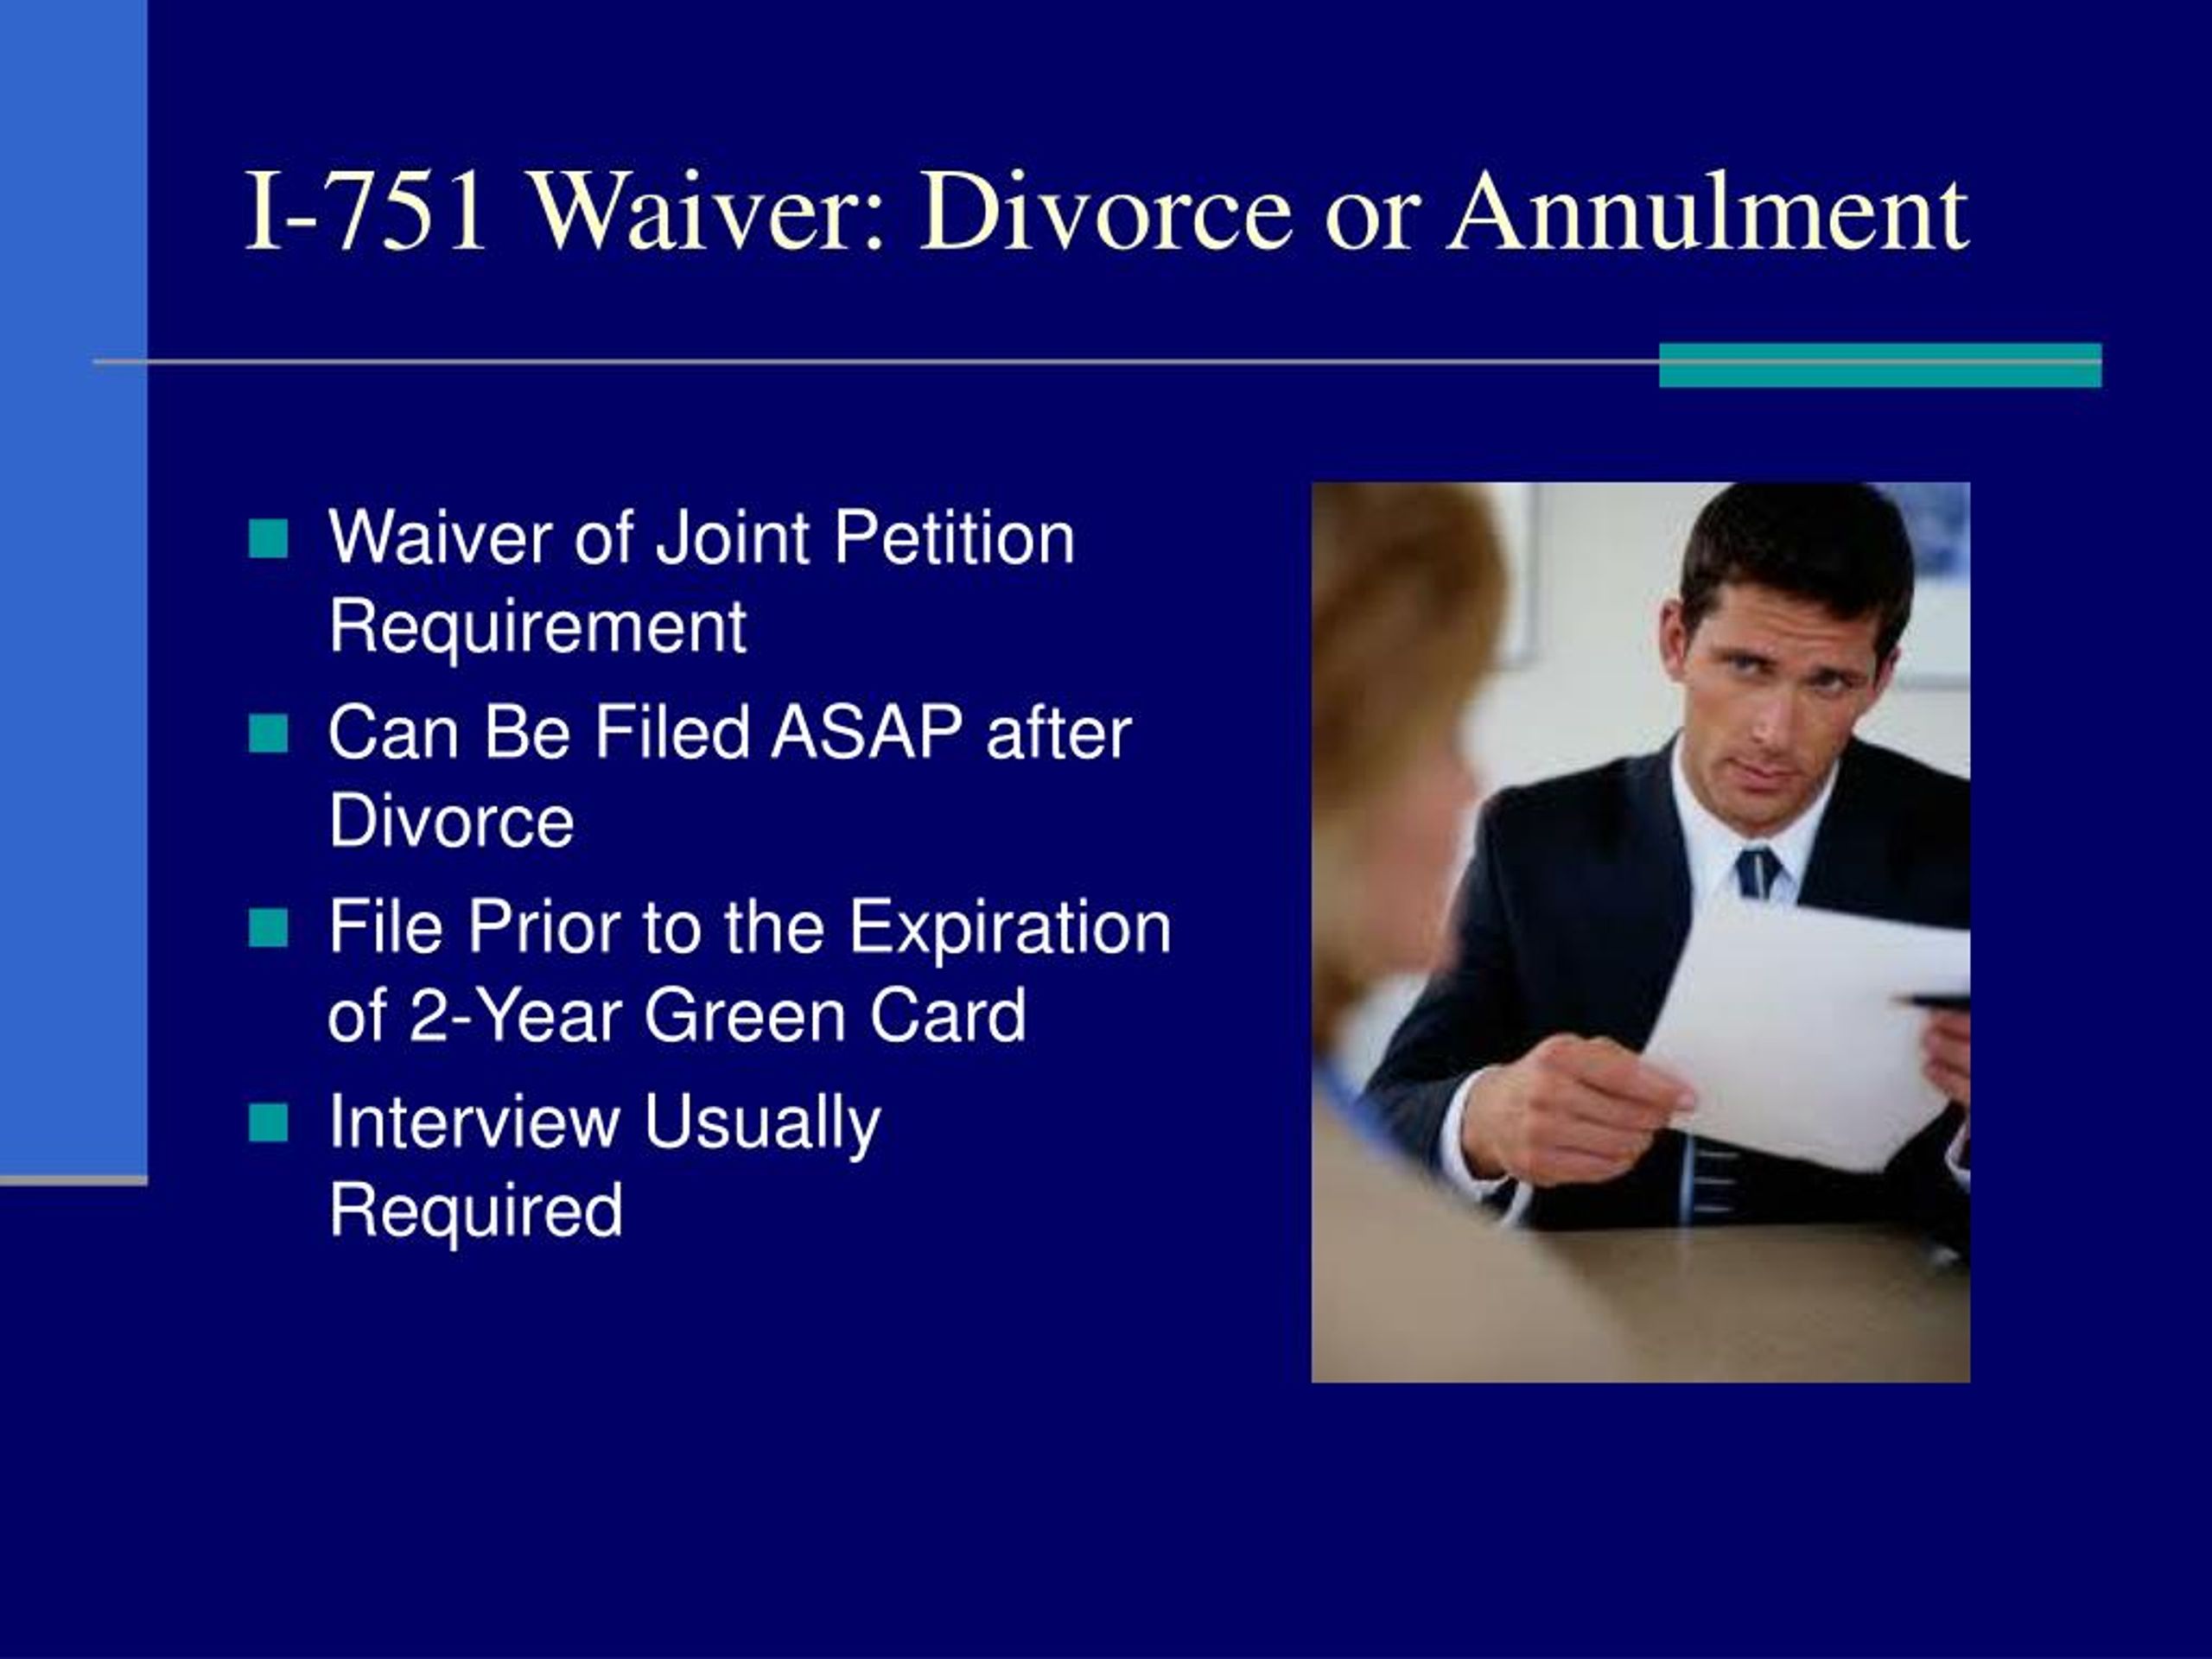 PPT - I-751 Waiver Where a Marriage Ends in Divorce PowerPoint Presentation - ID:7136633